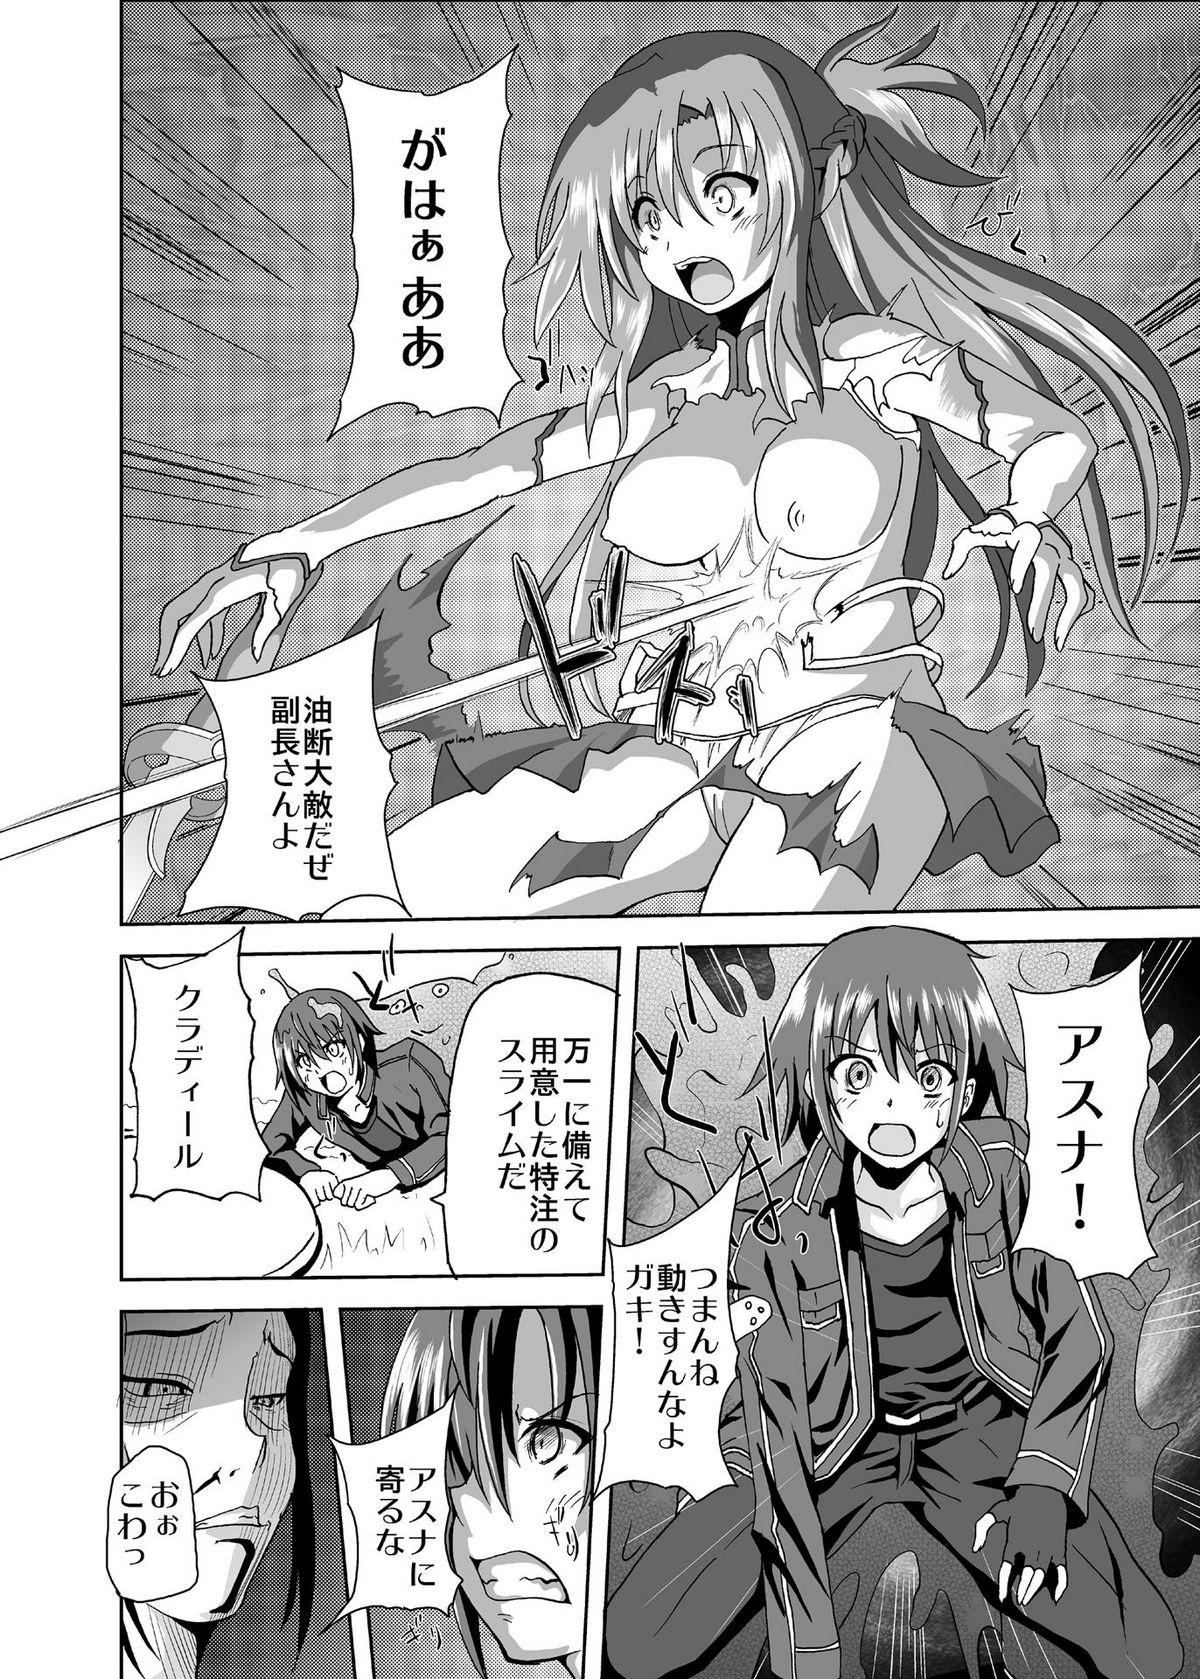 Farting Defeated Heroine A - Sword art online Moms - Page 5